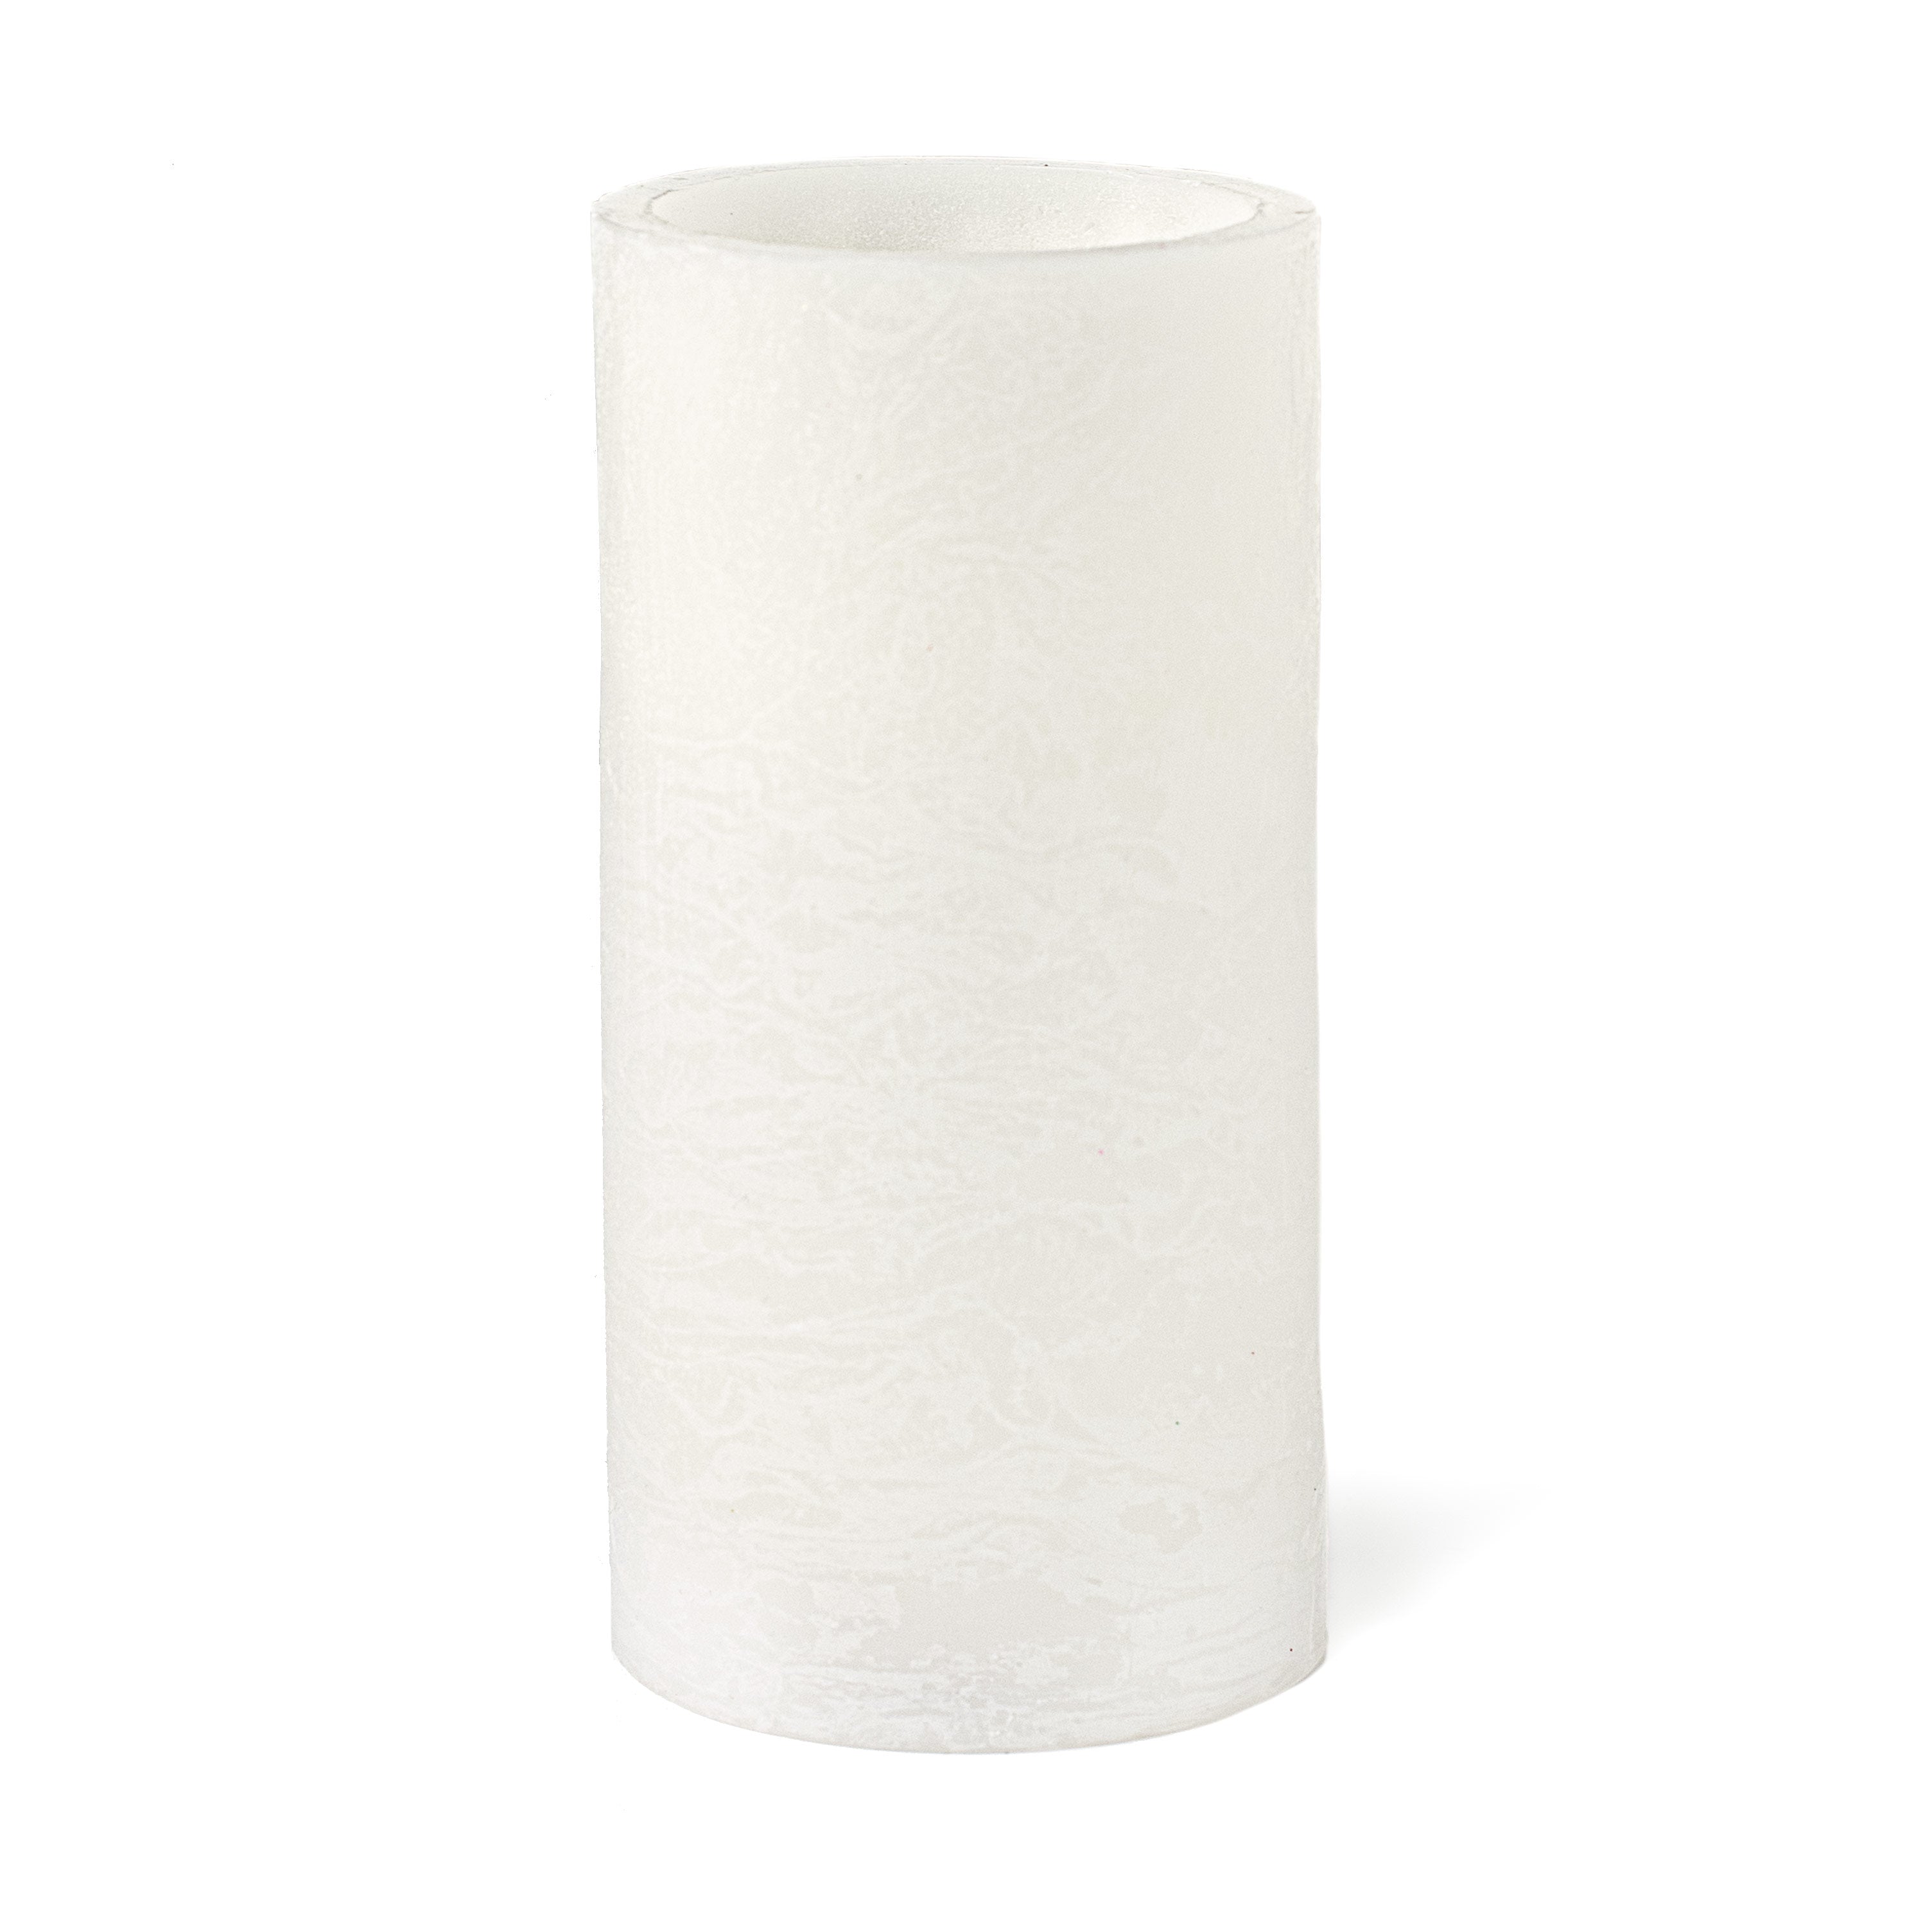 6" Frosted Flameless Candle: White